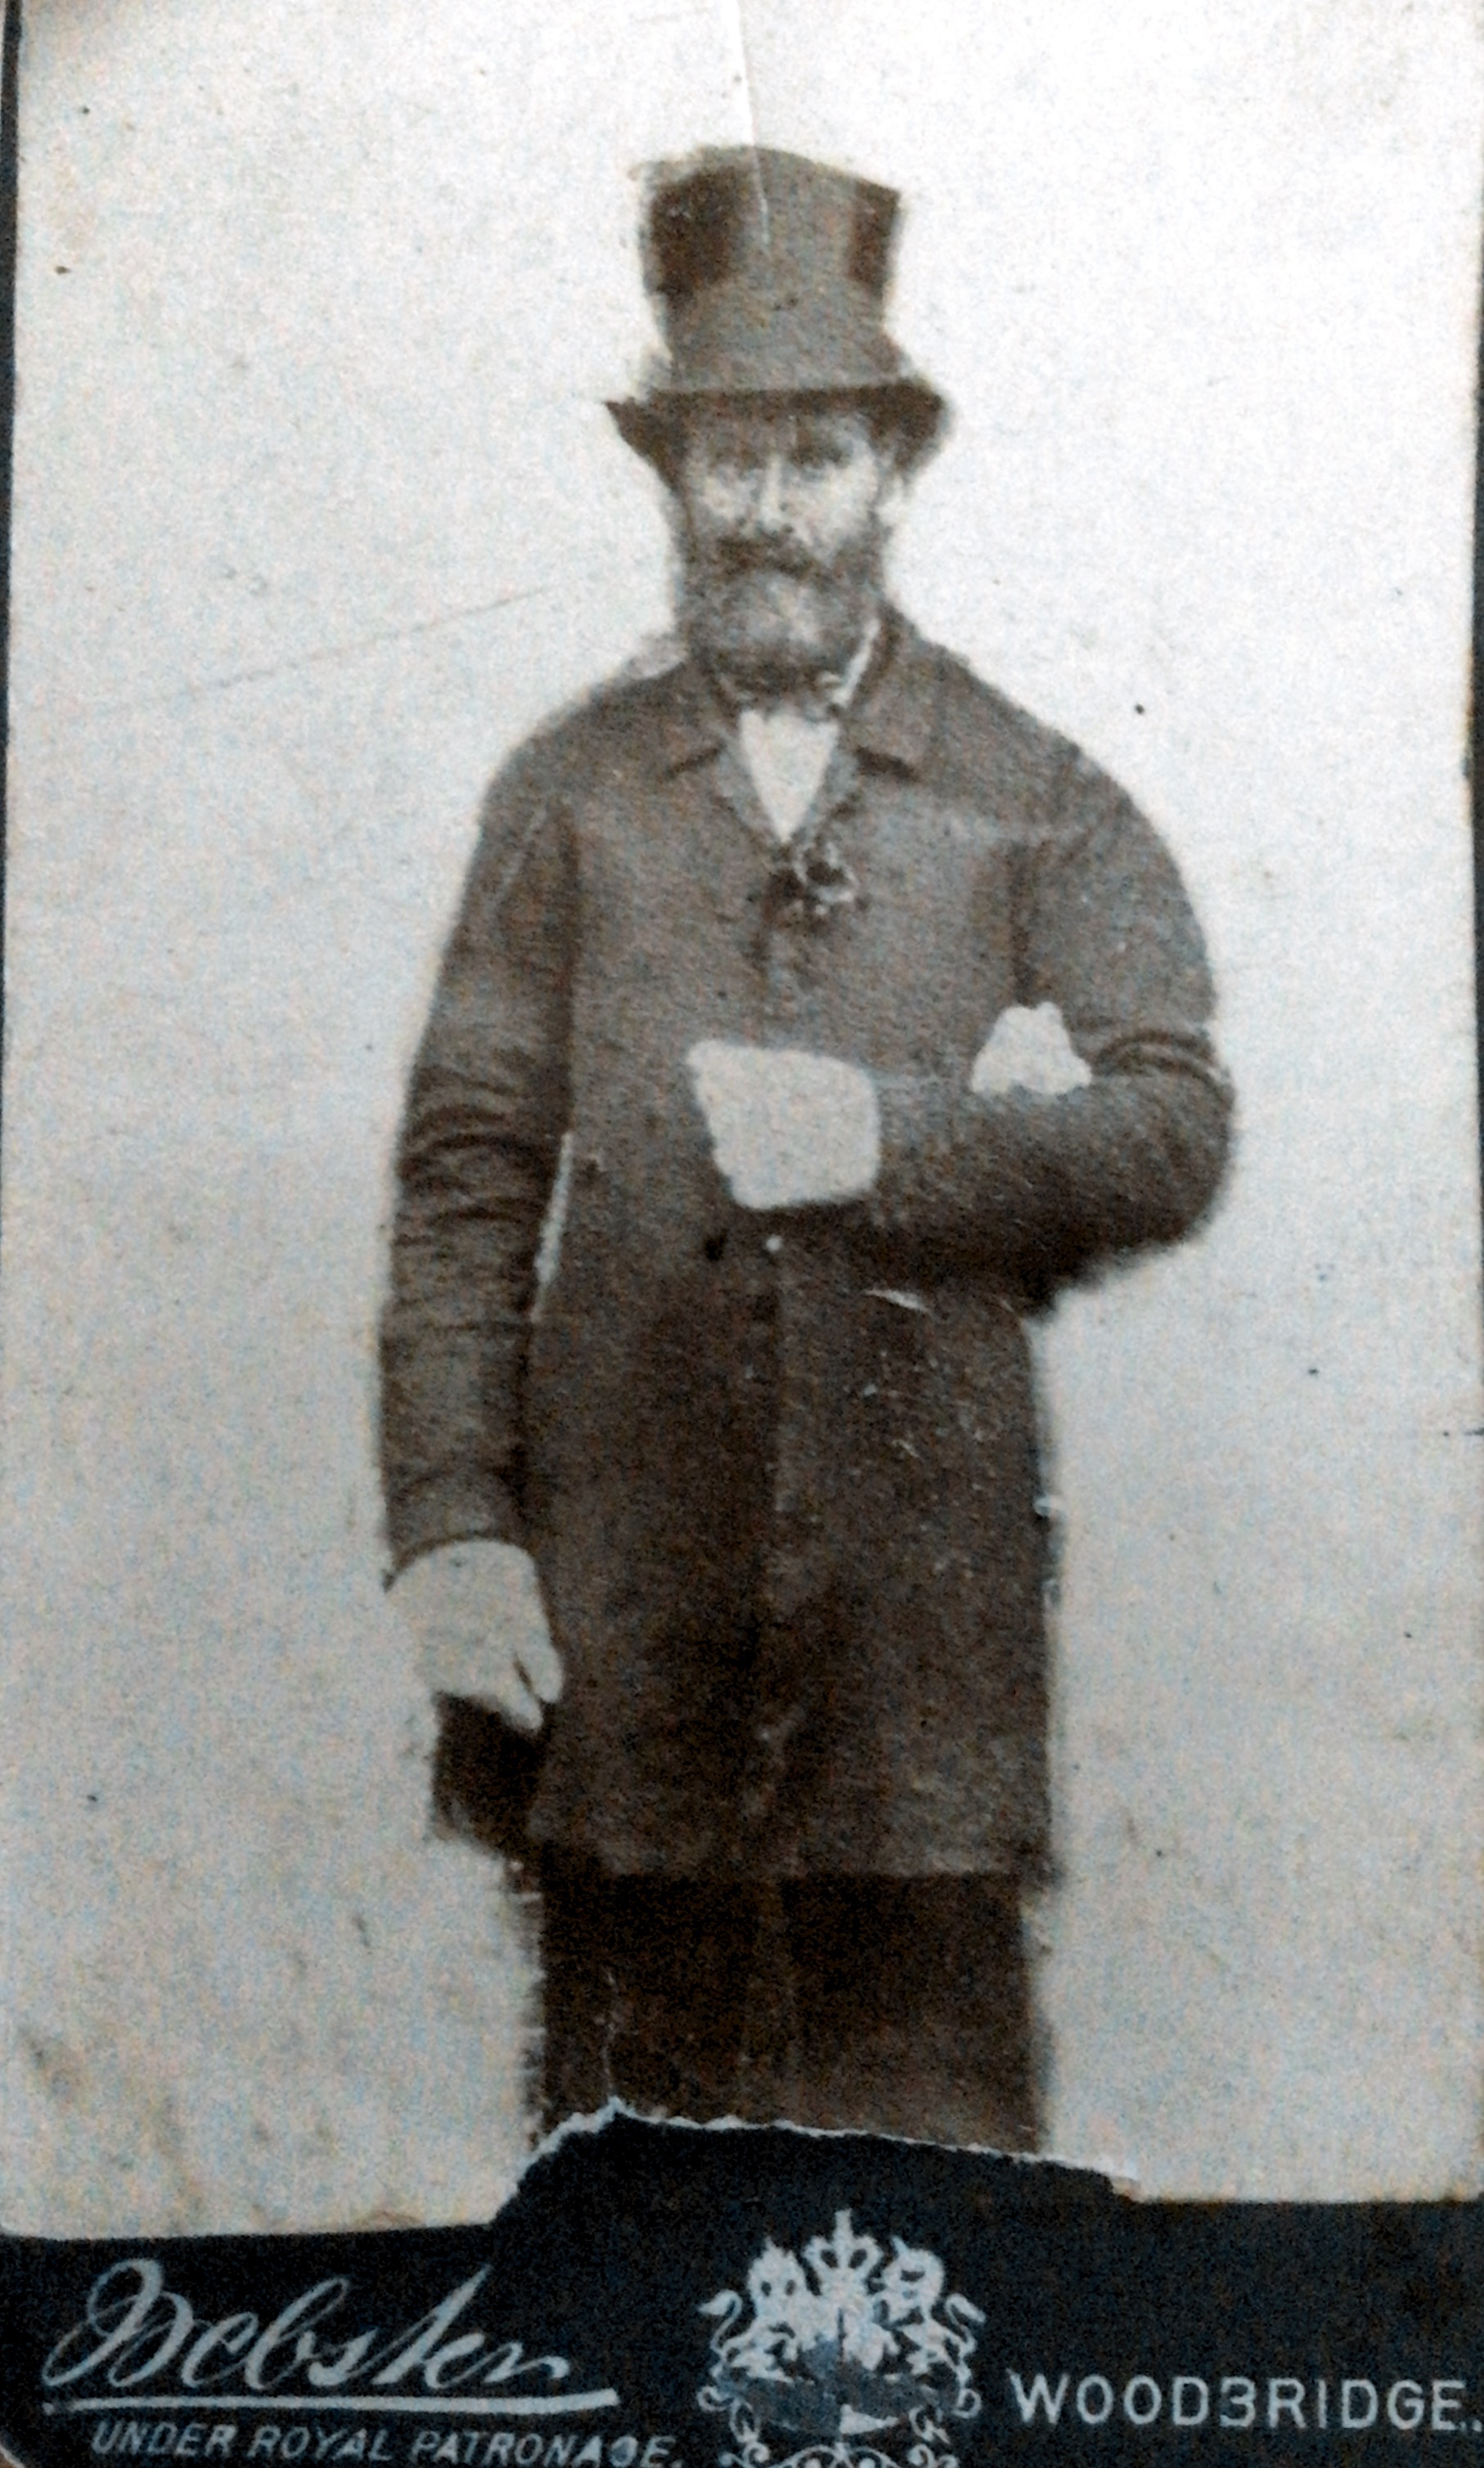 Amos Fisk b 1825. m 12 October 1852. d 20th April 1895. 
Possibly at his daughter’s wedding on 1st October 1878 when he would have been 53 years old. Note the ghostly hand linking his left arm!